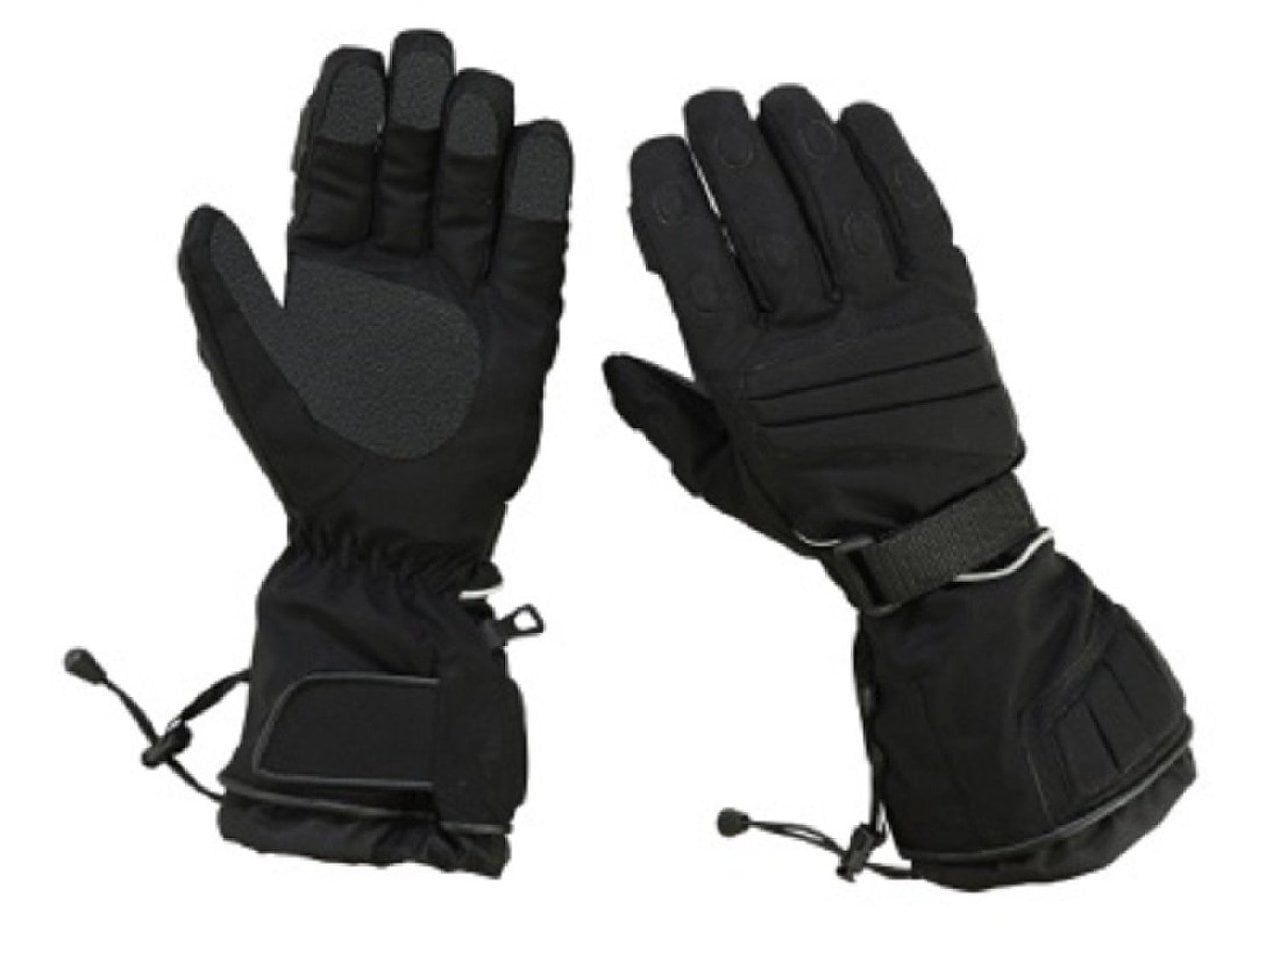 Hugger Insulated Men's Textile Motorcycle Gloves Gauntlet Snowmobile Winter Snow Ski Driving